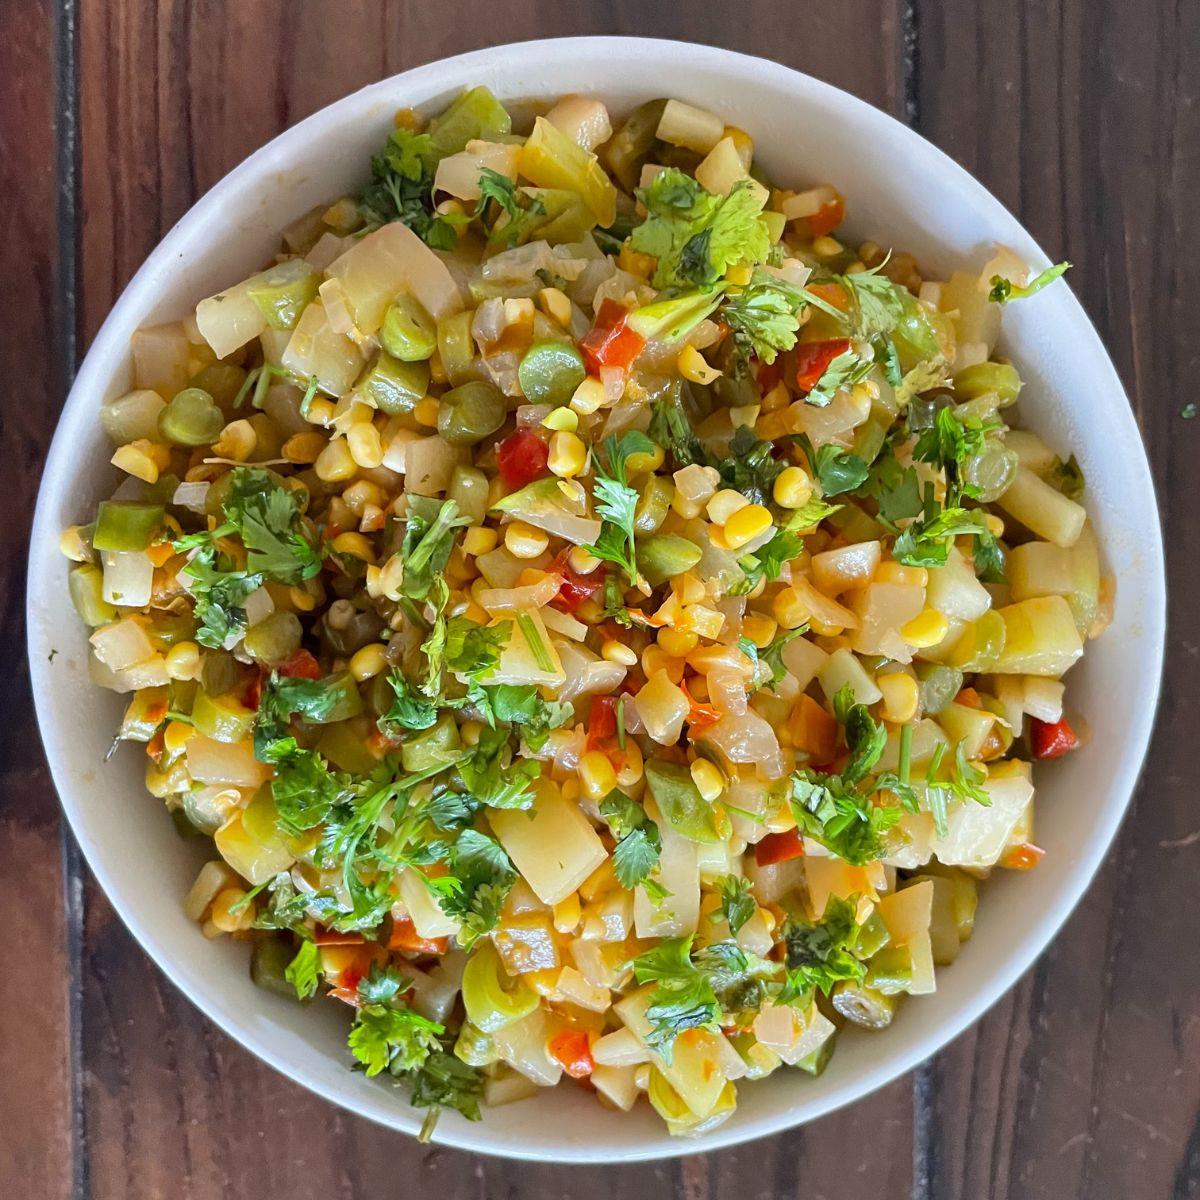 A bowl of corn and vegetable salad on a wooden table.